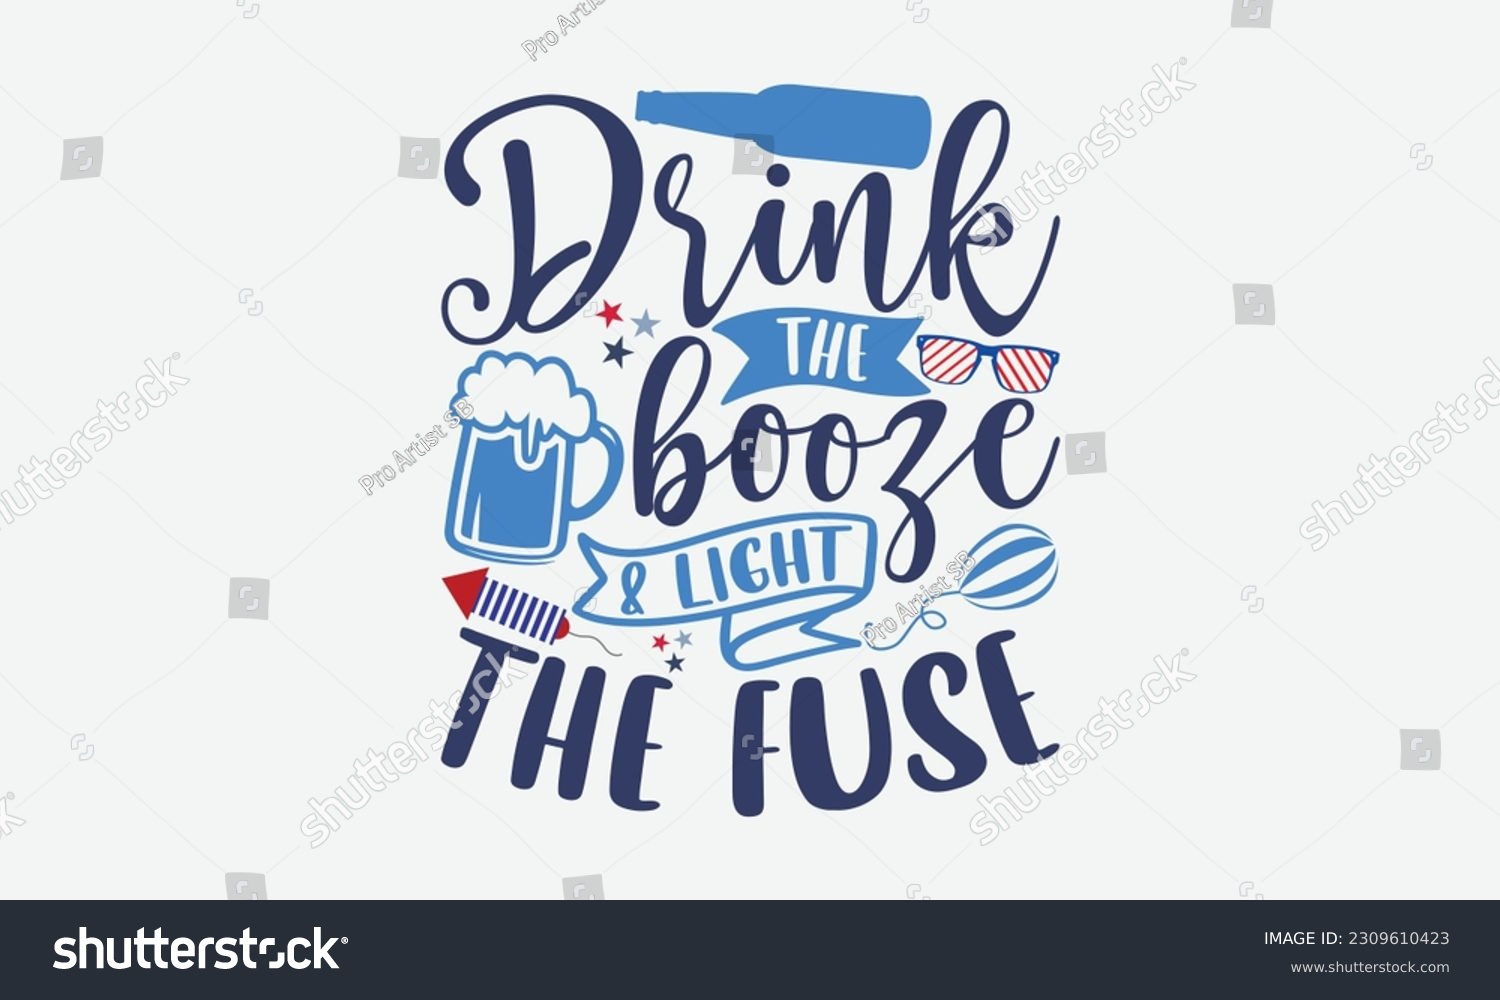 SVG of Drink The Booze Light The Fuse - 4th Of July T-Shirt Design, Independence Day SVG, 4th Of July Sublimation Design, Handmade Calligraphy Vector Illustration. svg